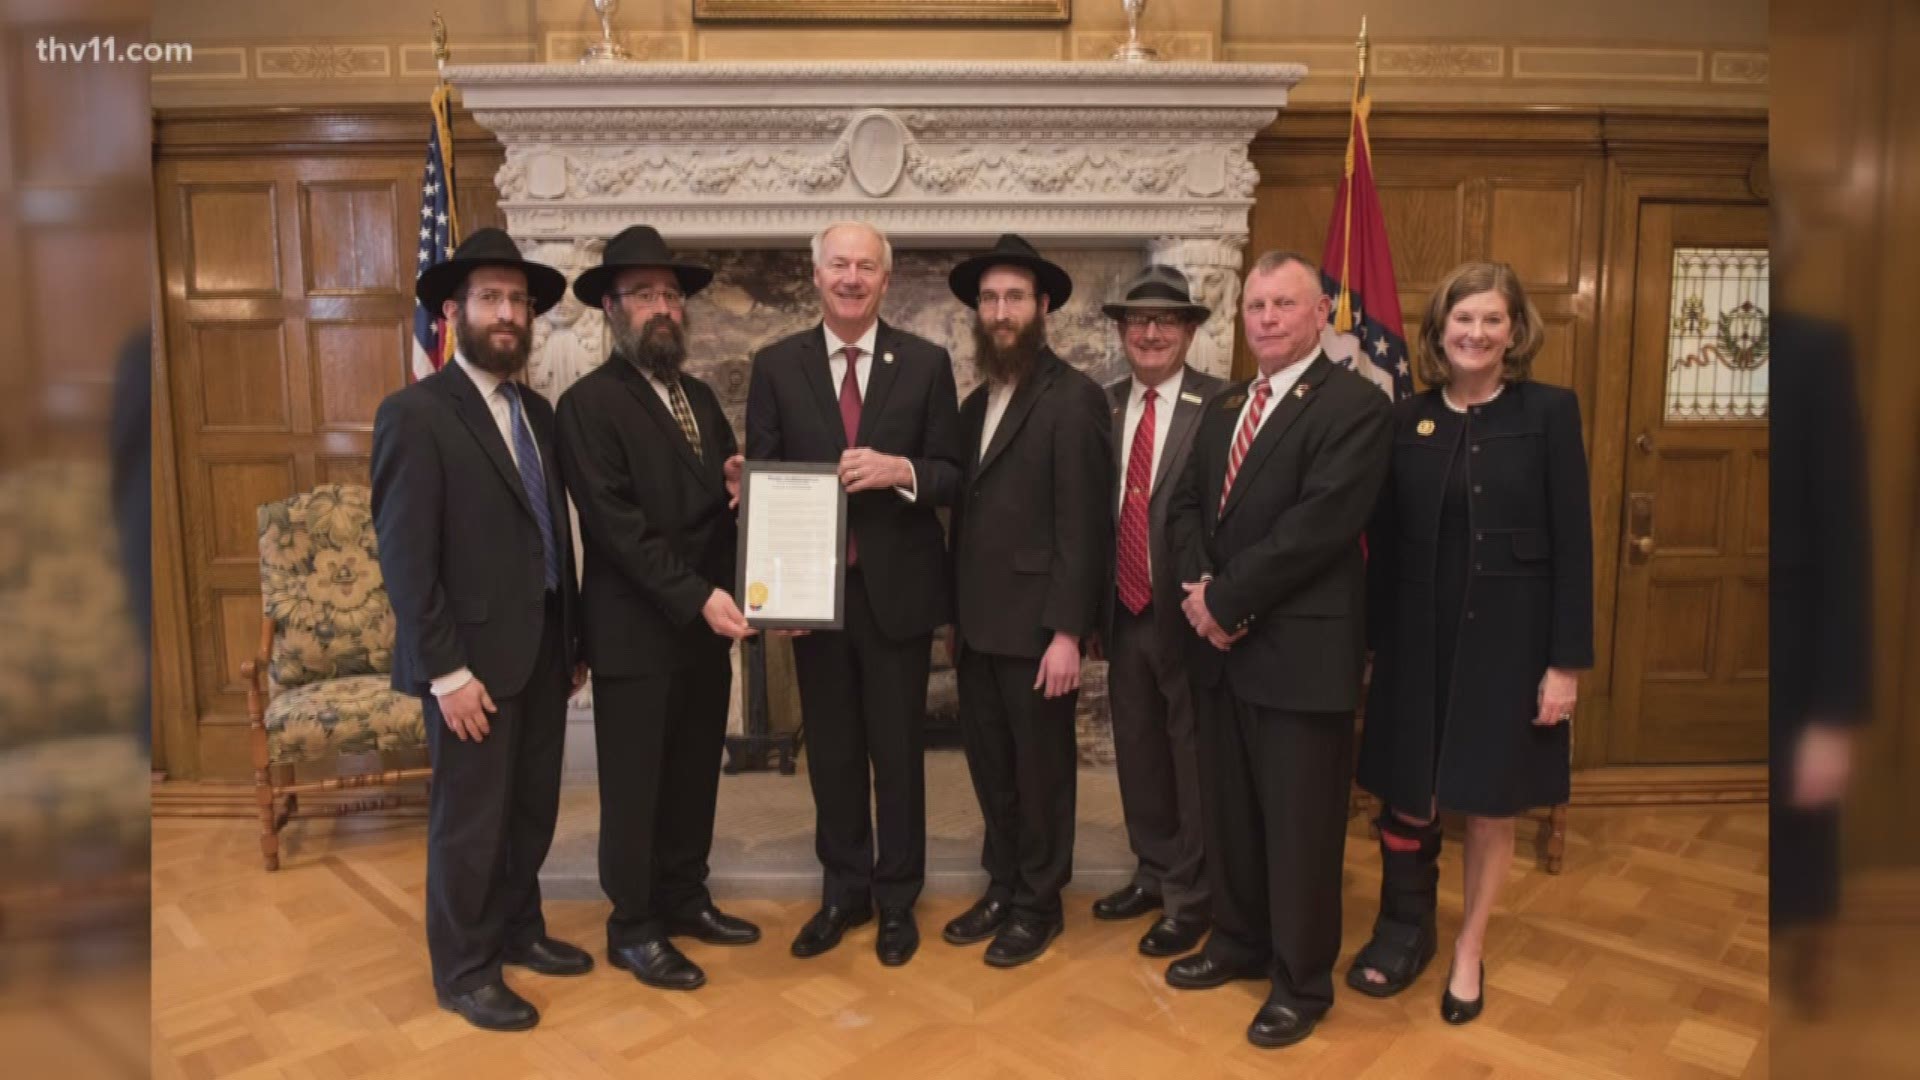 Governor Asa Hutchinson proclaimed March 27 Education and Sharing Day in honor of Rebbe, one of the most influential rabbis in modern history.